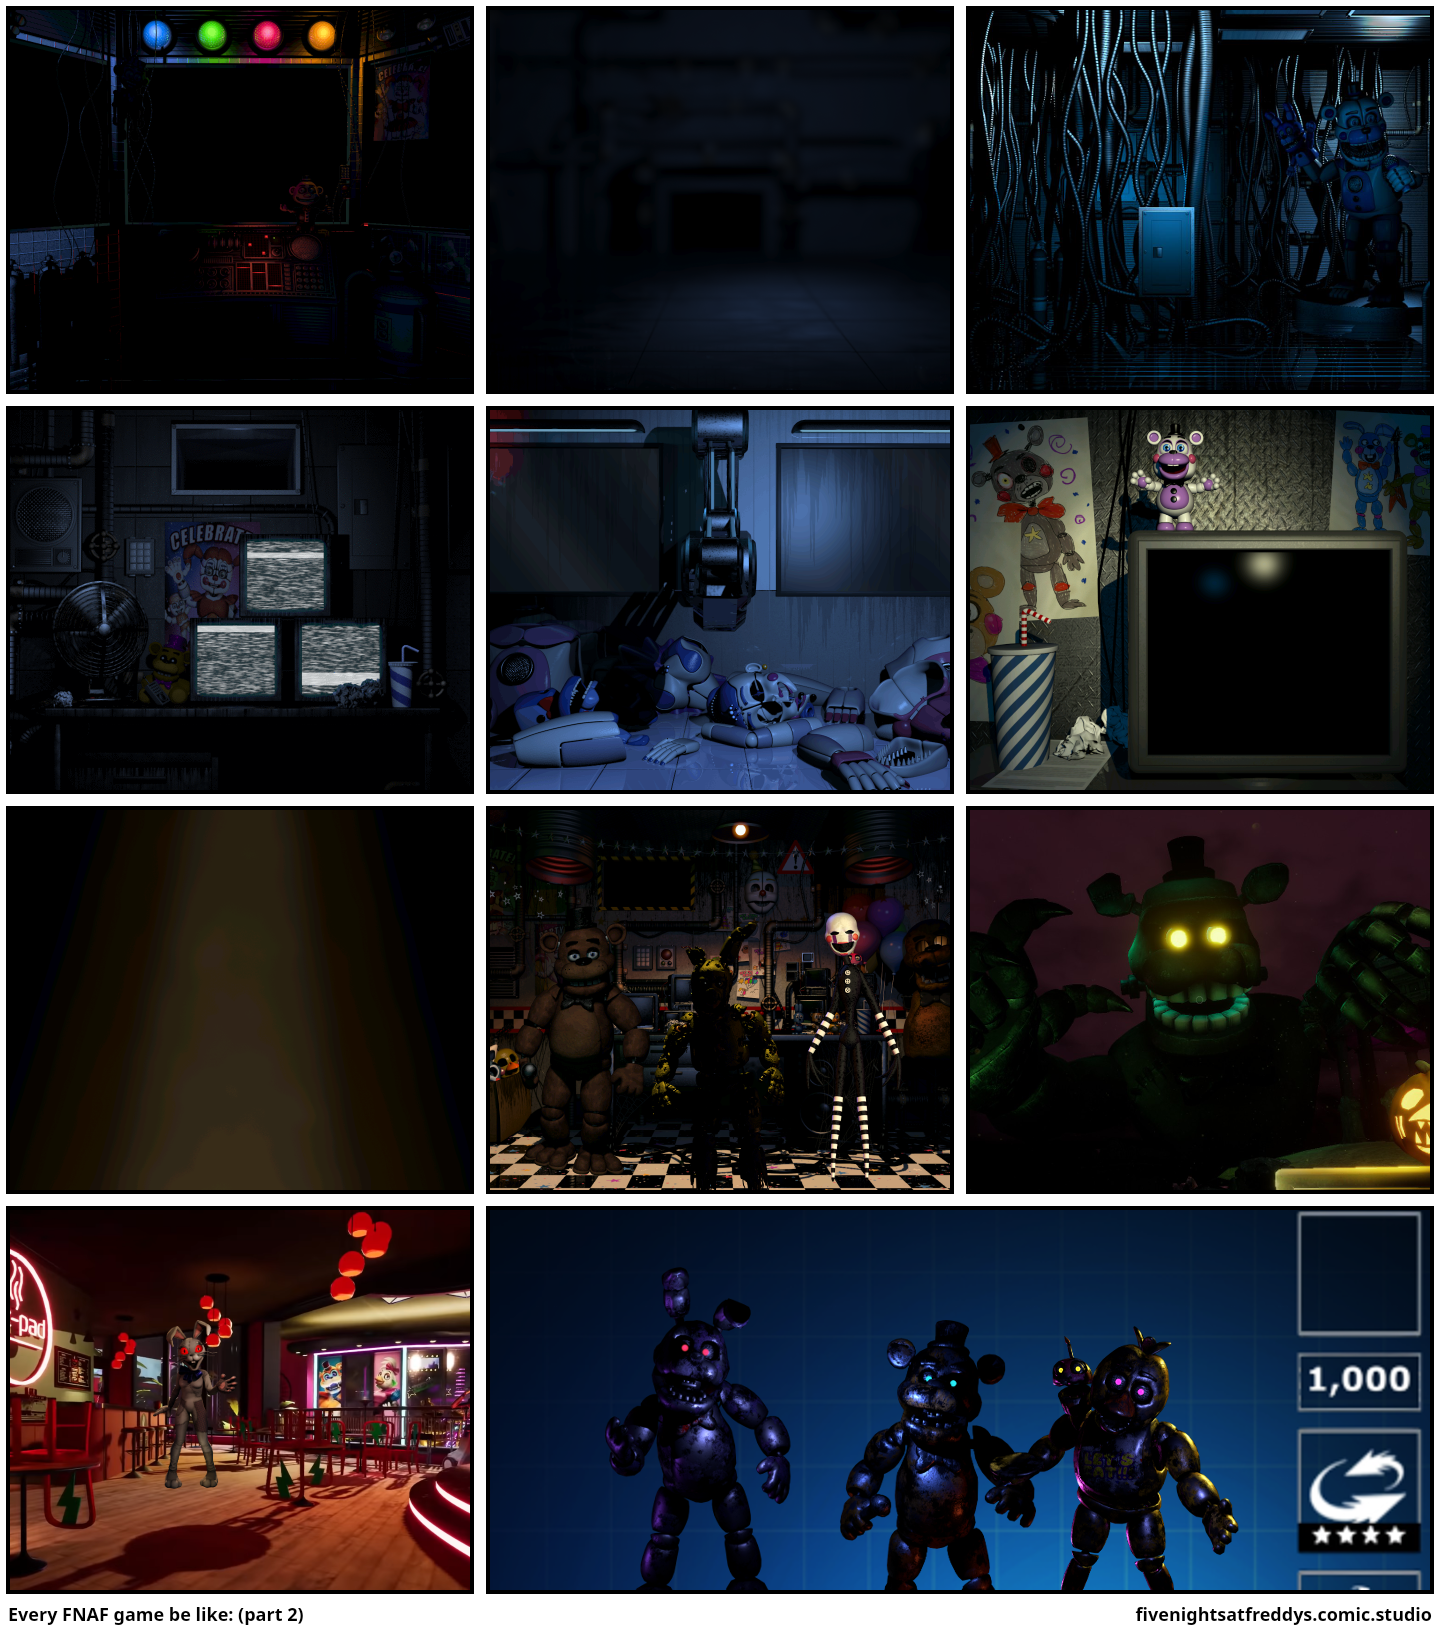 Every FNAF game be like: (part 2)